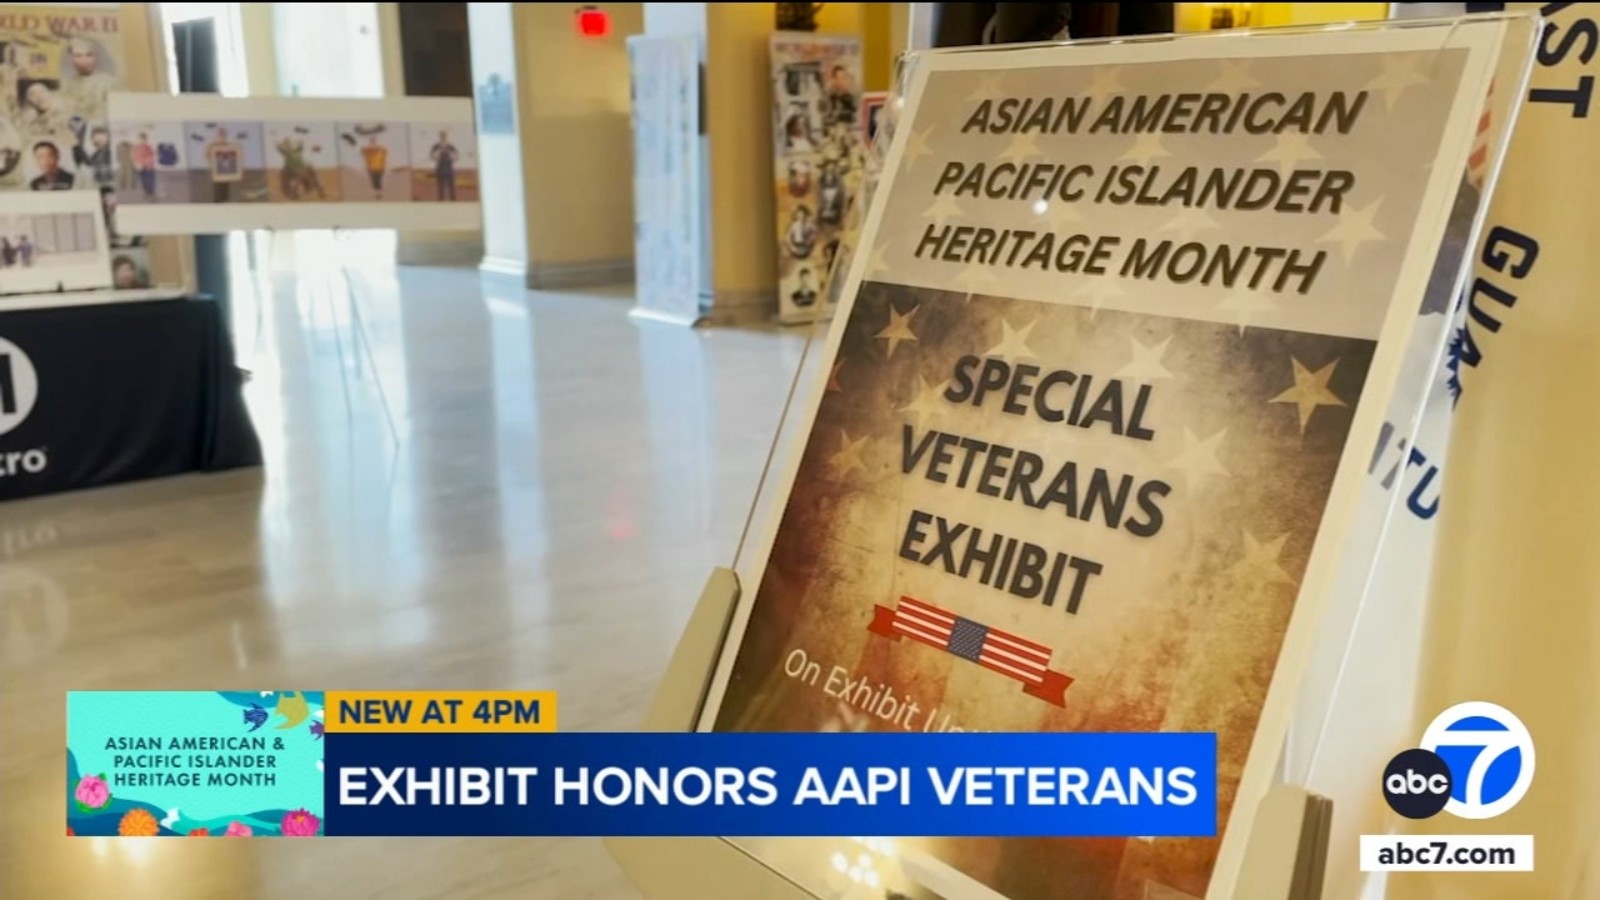 New exhibit honors the contributions of Asian American veterans